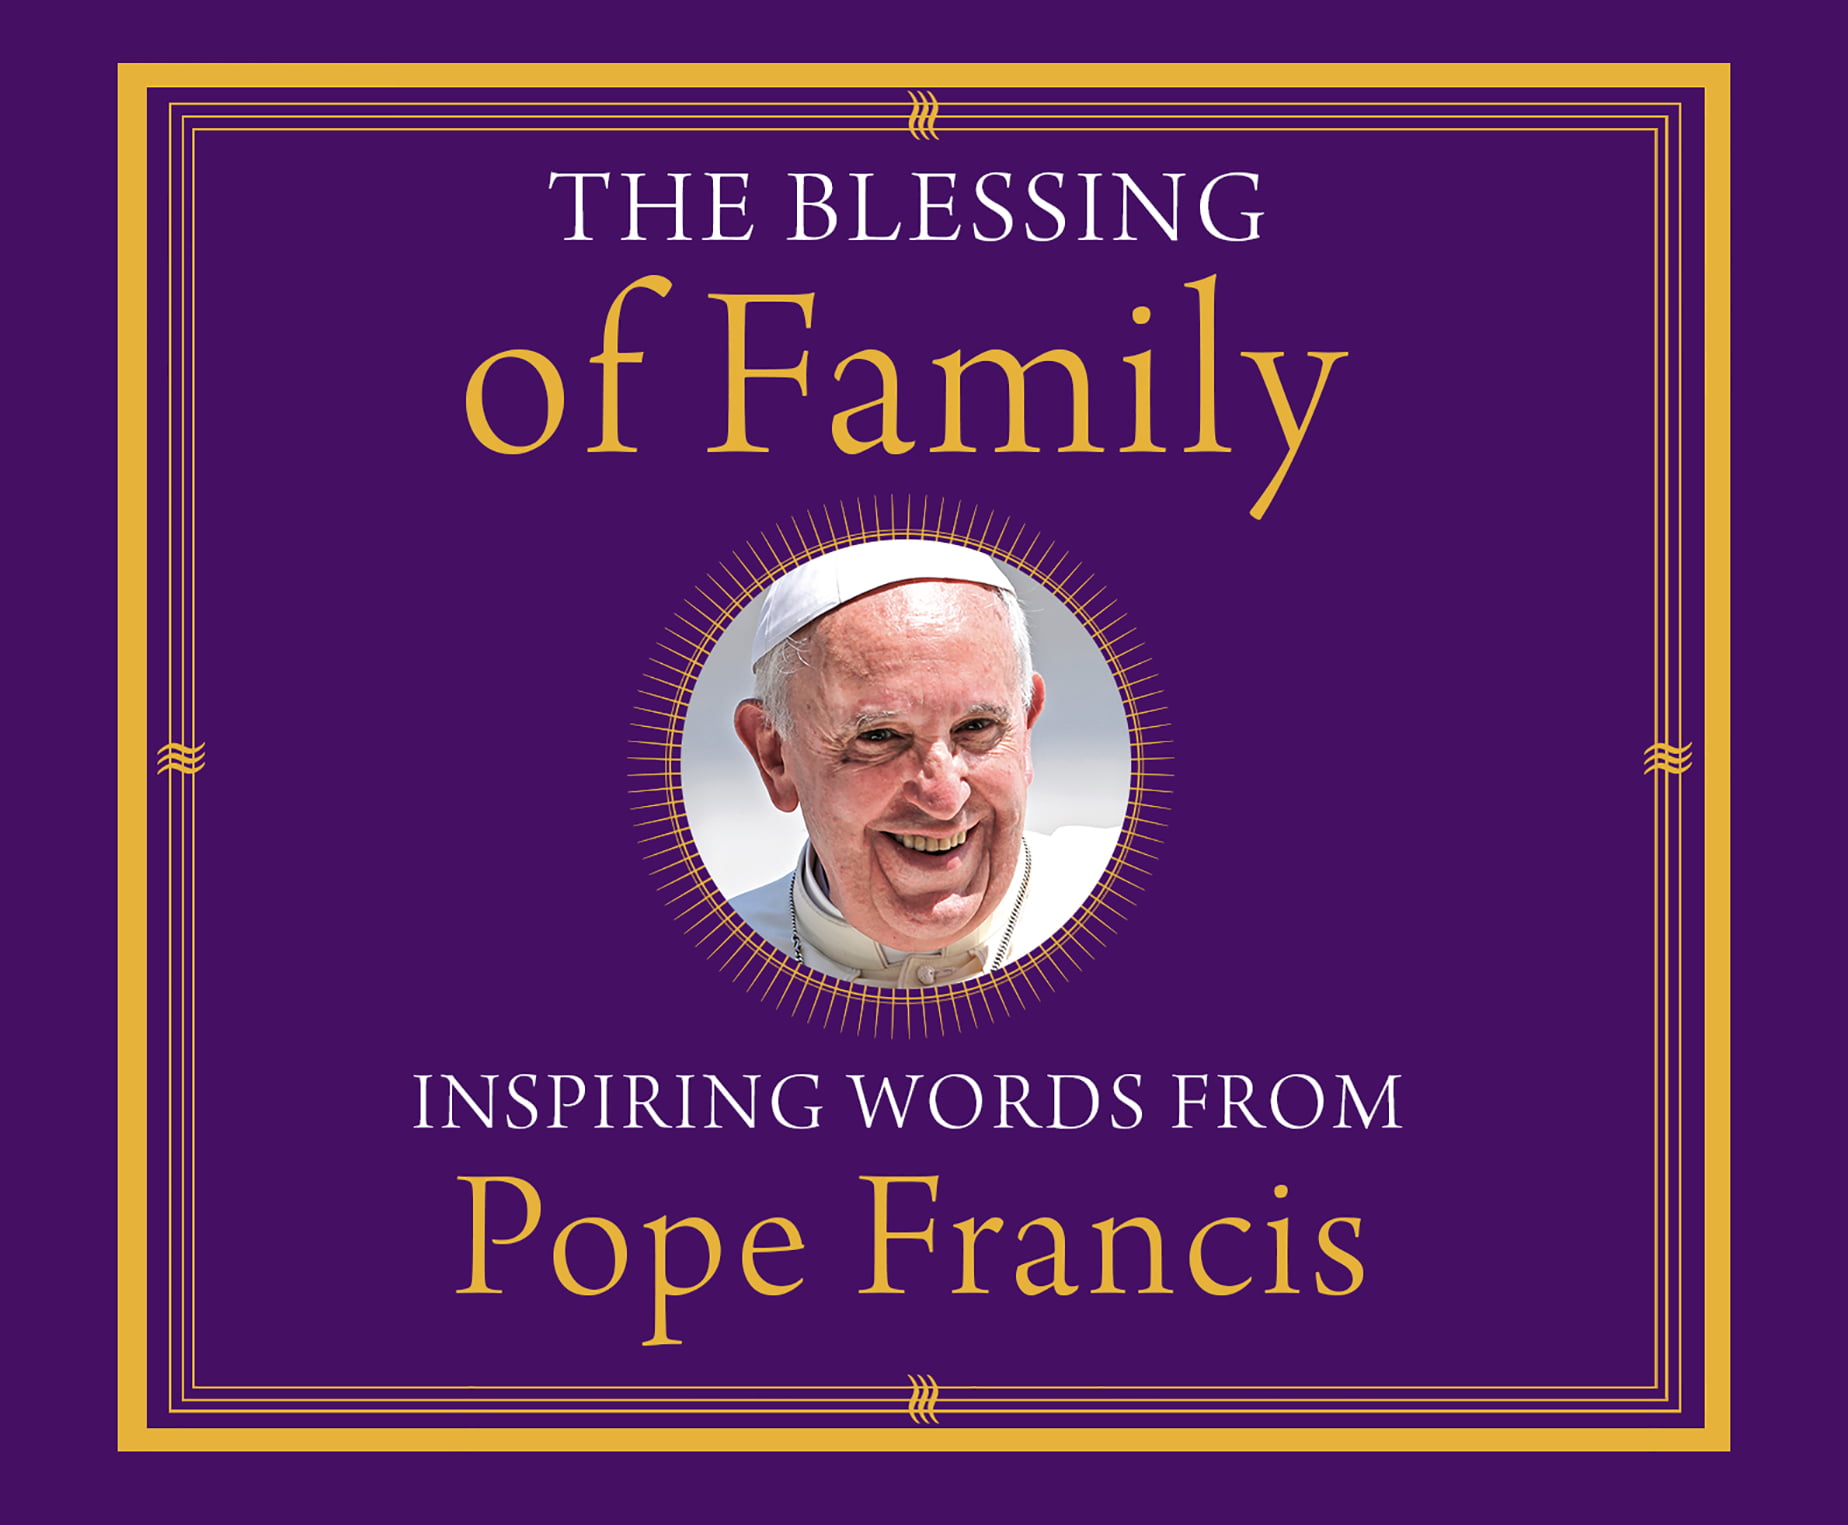 The Blessing of Family  Inspiring Words from Pope Francis  Walmart.com